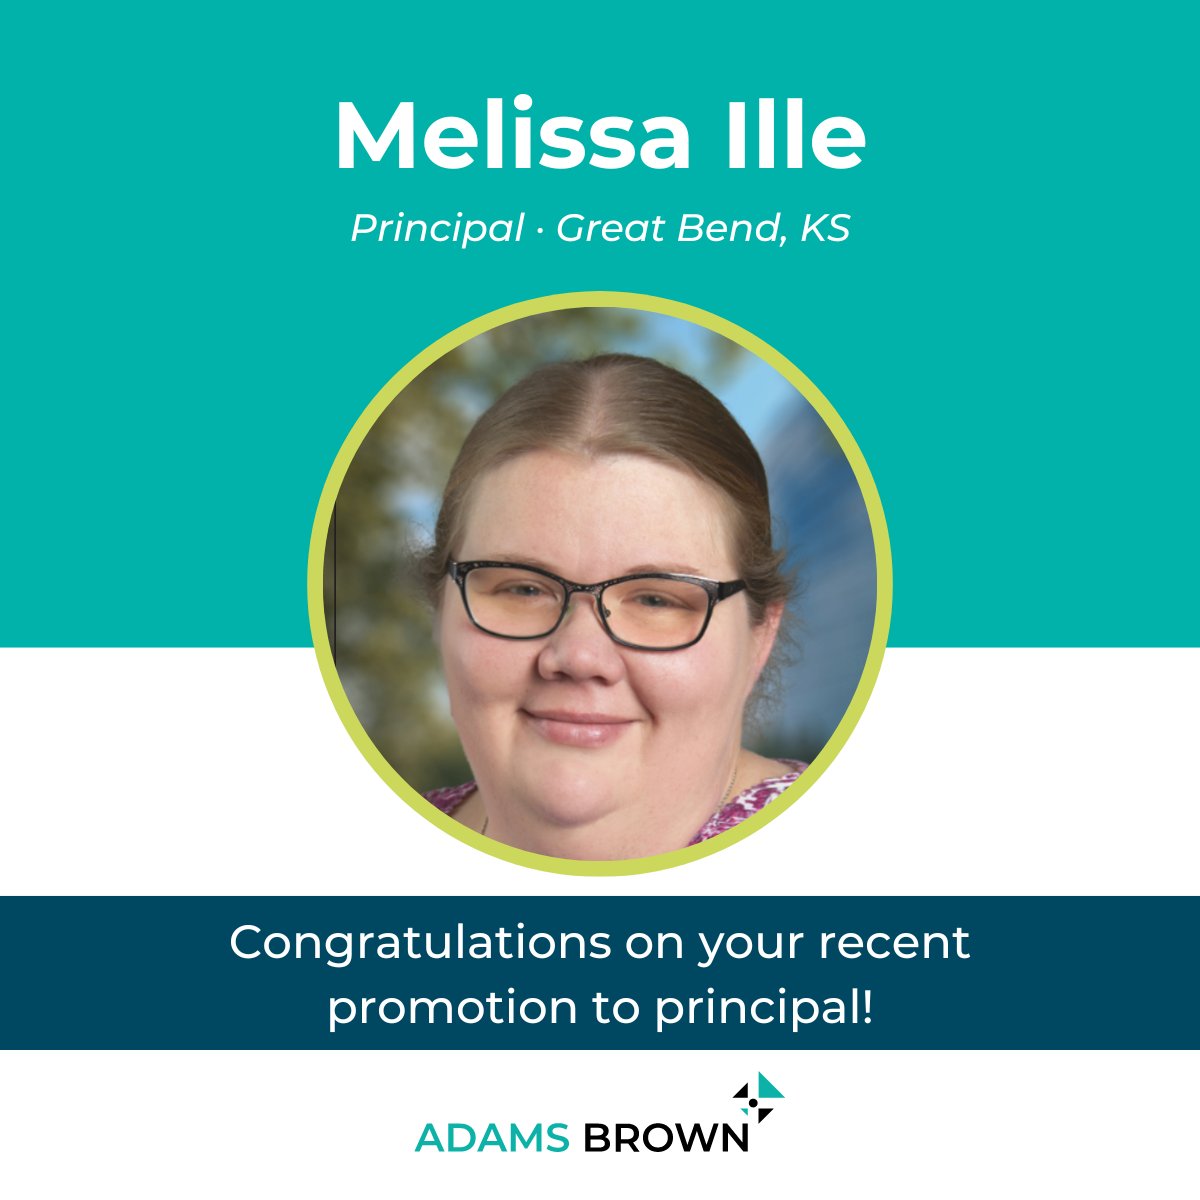 Melissa Ille was recently promoted to principal, and we couldn't be more proud of her accomplishments! 

Learn more about Melissa at the link below!
>> hubs.la/Q02sN_dj0

#promotion #principal #WorkWithAdamsBrown #GreatBend